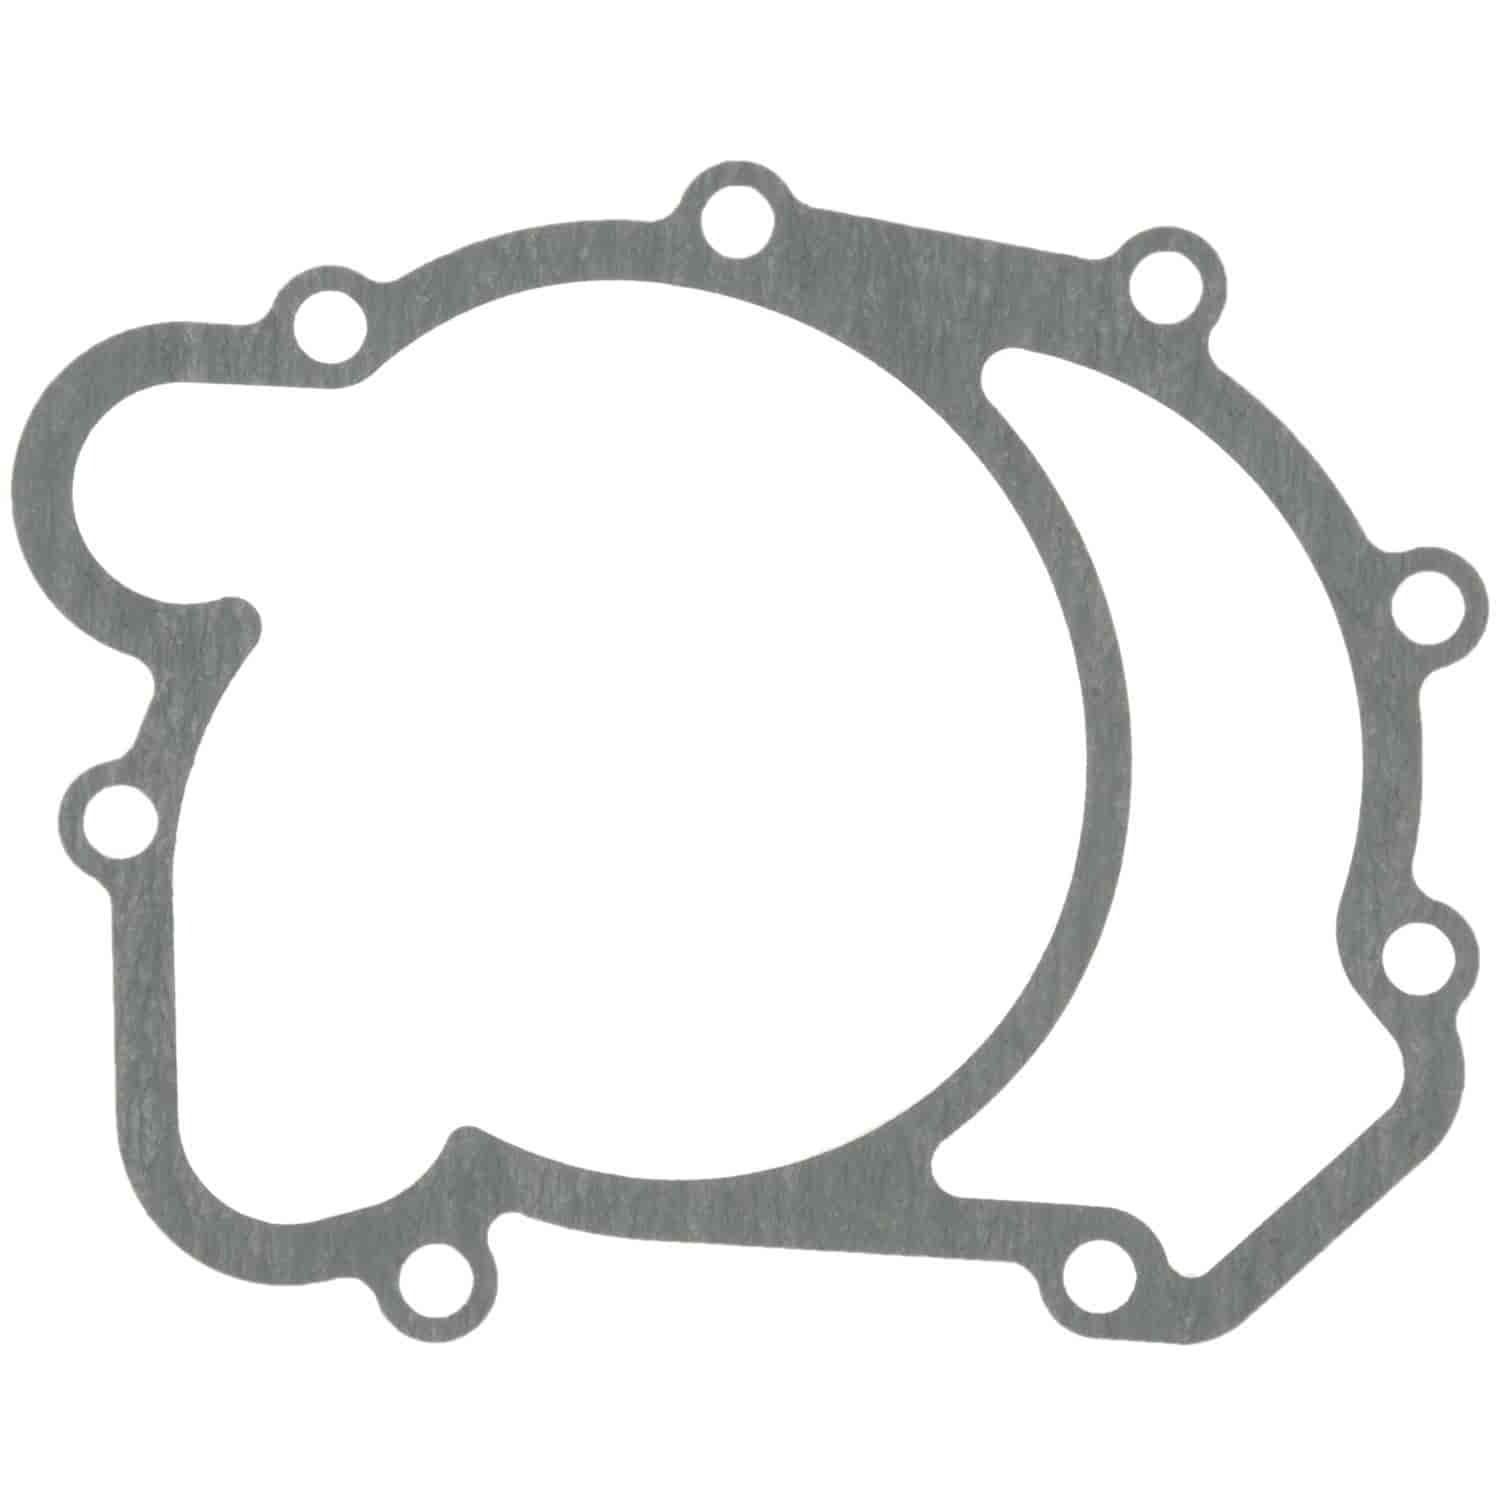 Water Pump Gasket MERCEDES 4.2L AND 5.0L 119.9 SERIES ENGINES 1990-1999